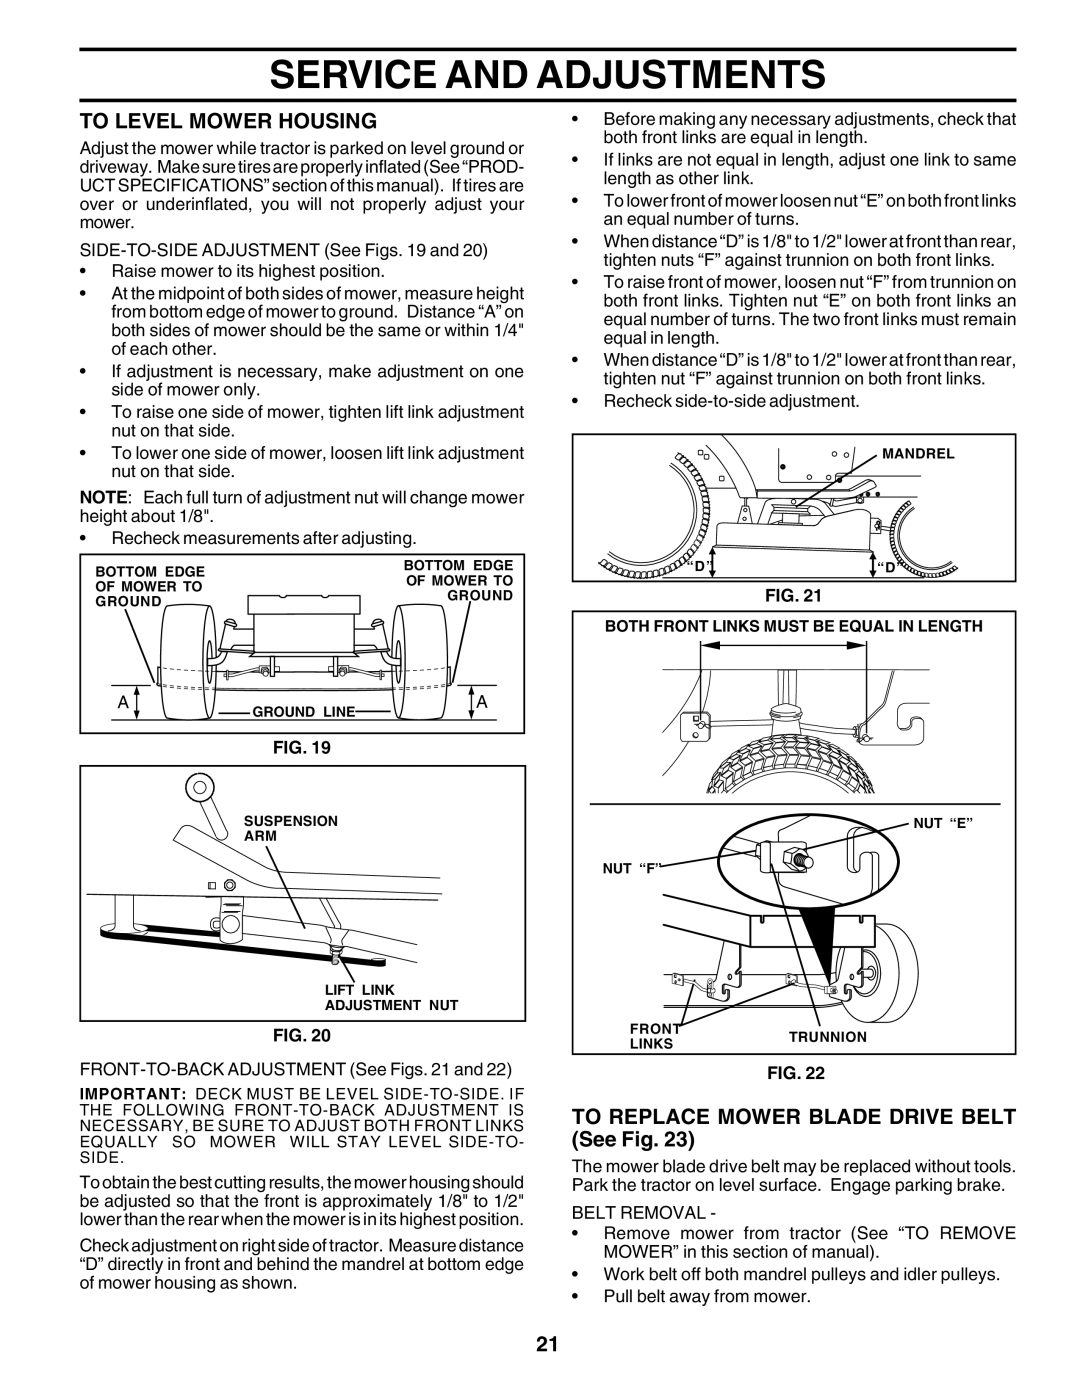 Poulan 183284 owner manual To Level Mower Housing, TO REPLACE MOWER BLADE DRIVE BELT See Fig, Service And Adjustments 